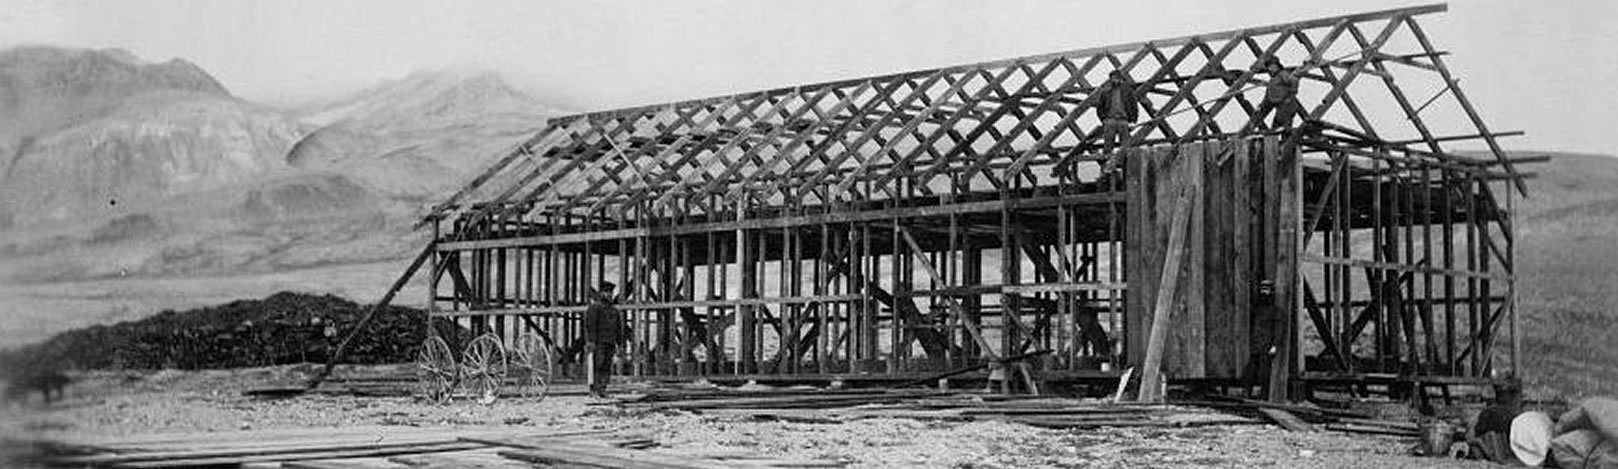 Historic photograph showing the completed house frame of the Lady Franklin Bay Expedition headquarters. In this photograph, the arched roof has been completed. Two figures stand on the roof frame adding wall boards.